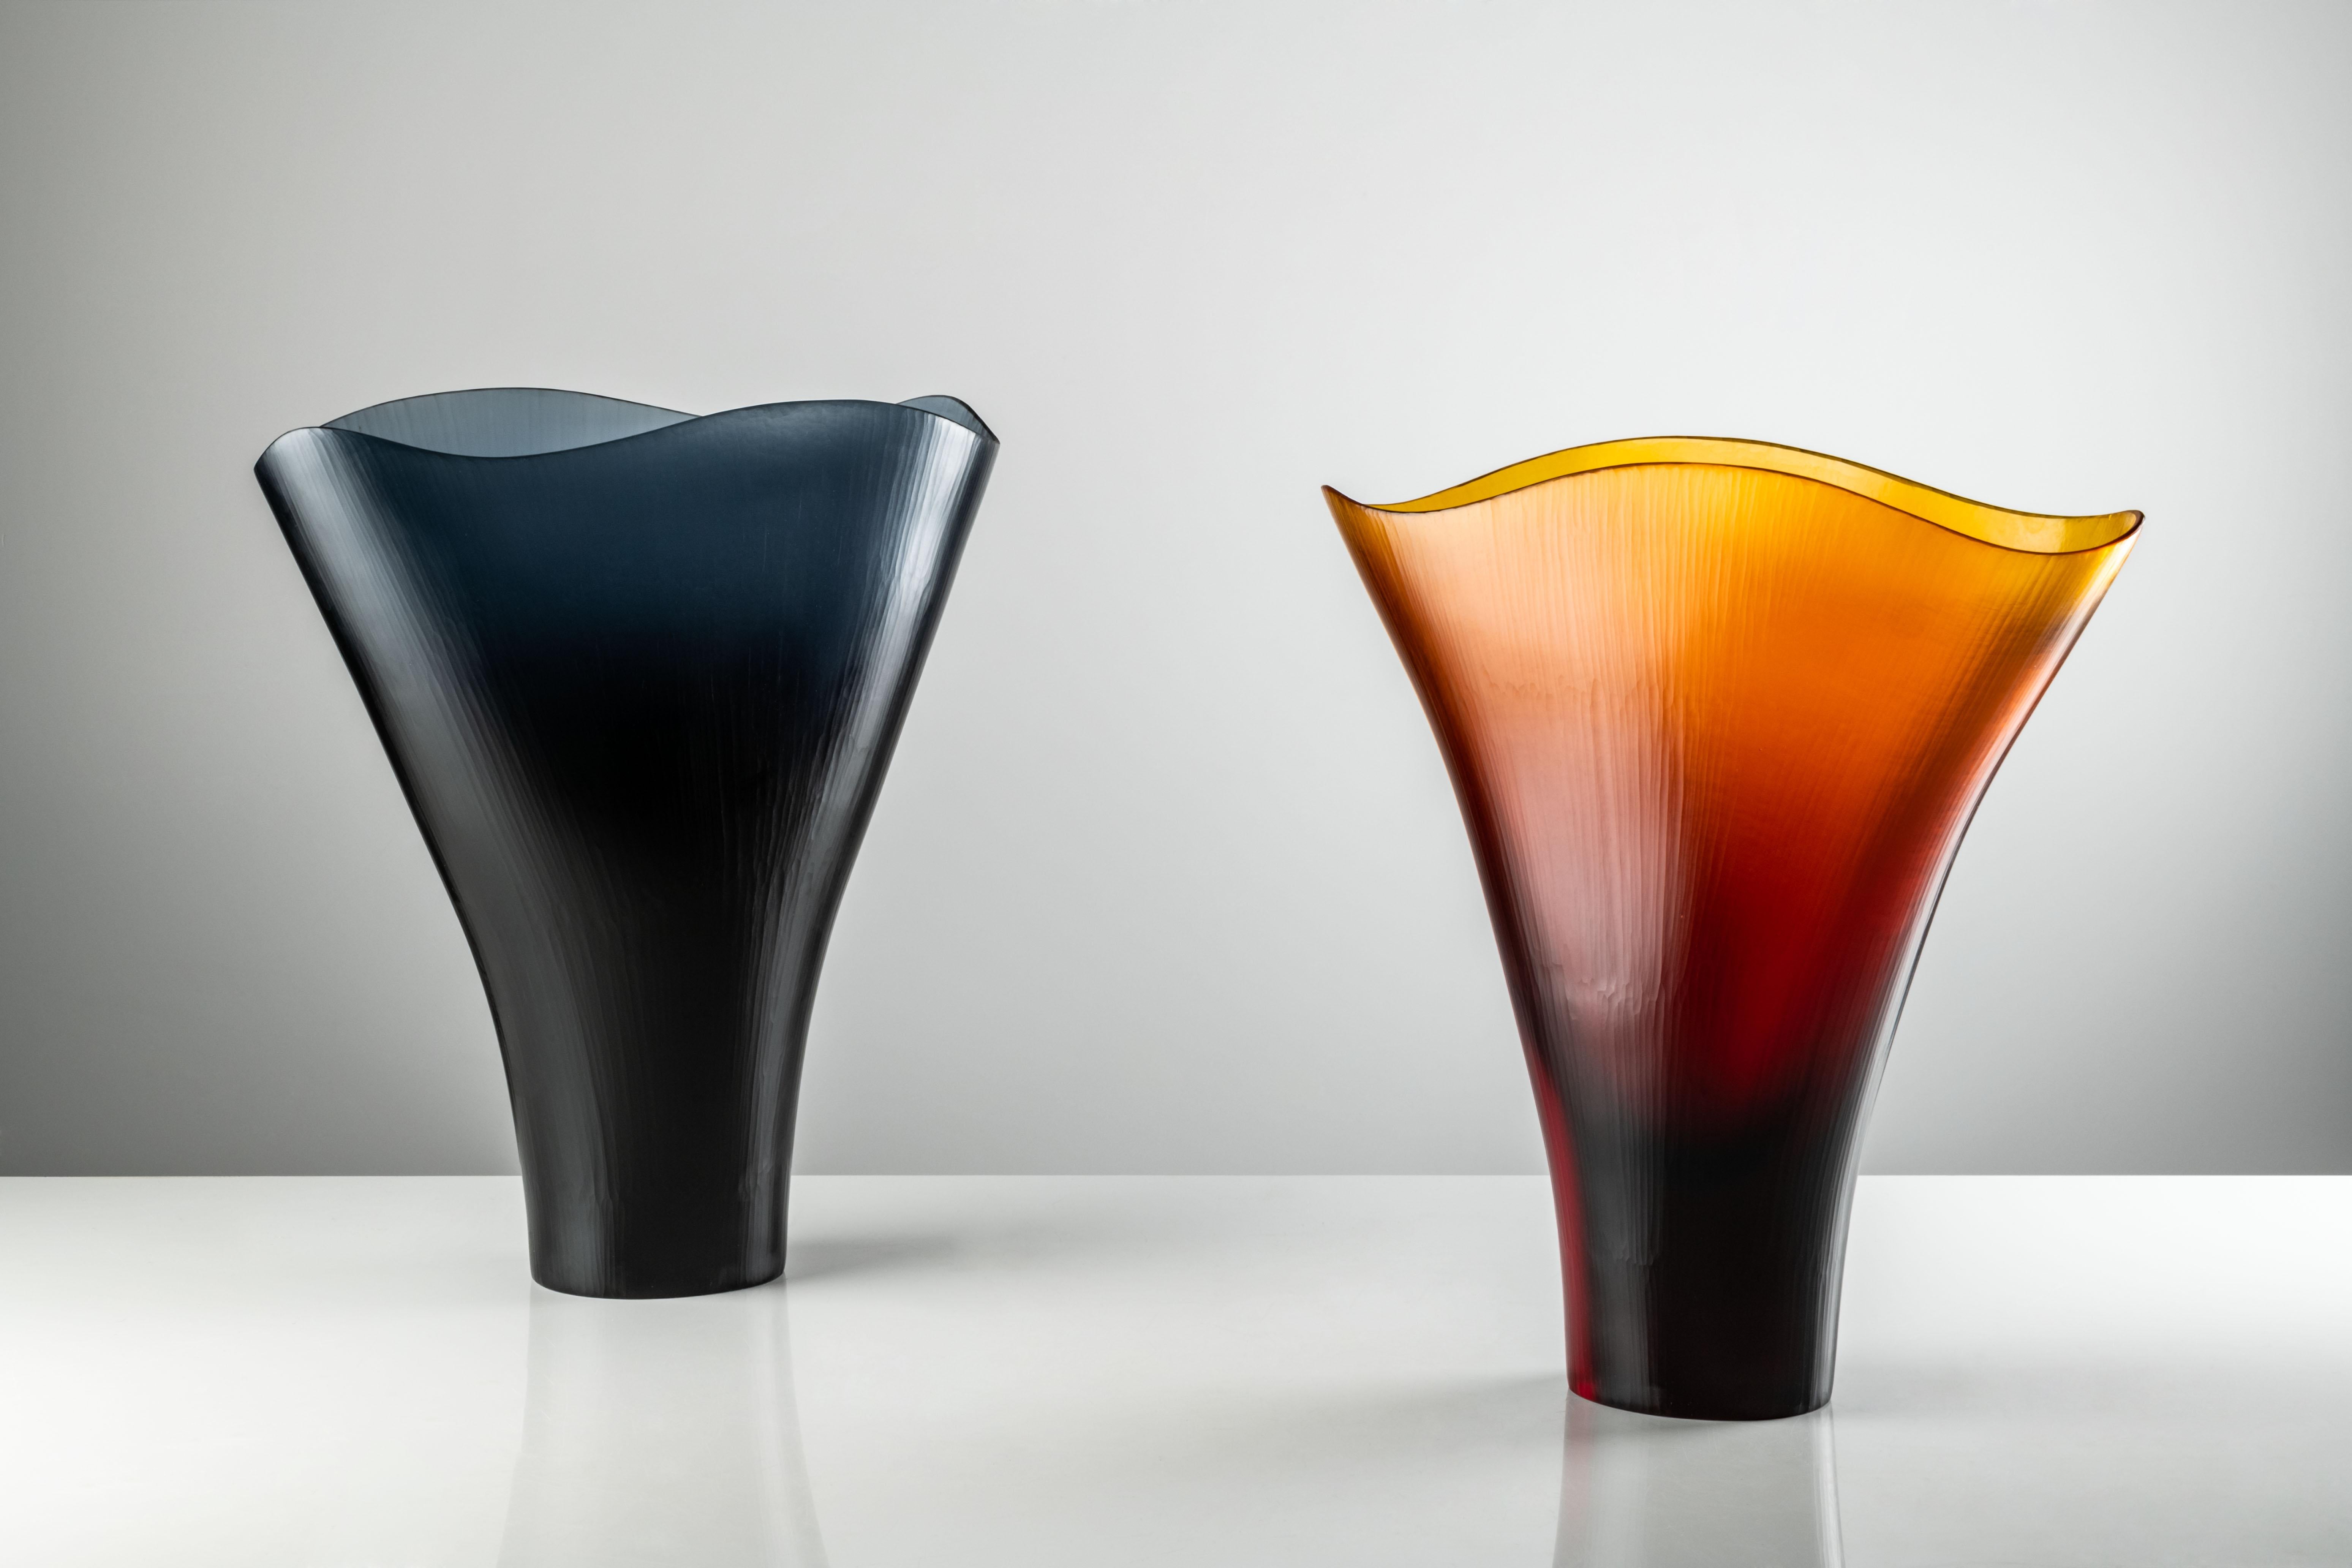 Battuti vase in Amber Murano glass by Tobia Scarpa and Ludovico Diaz De Santillana for Venini. It evokes a lily standing tall, in tones of Amber and Grape. Its translucent appearance is the result of the skill and hard work of the master